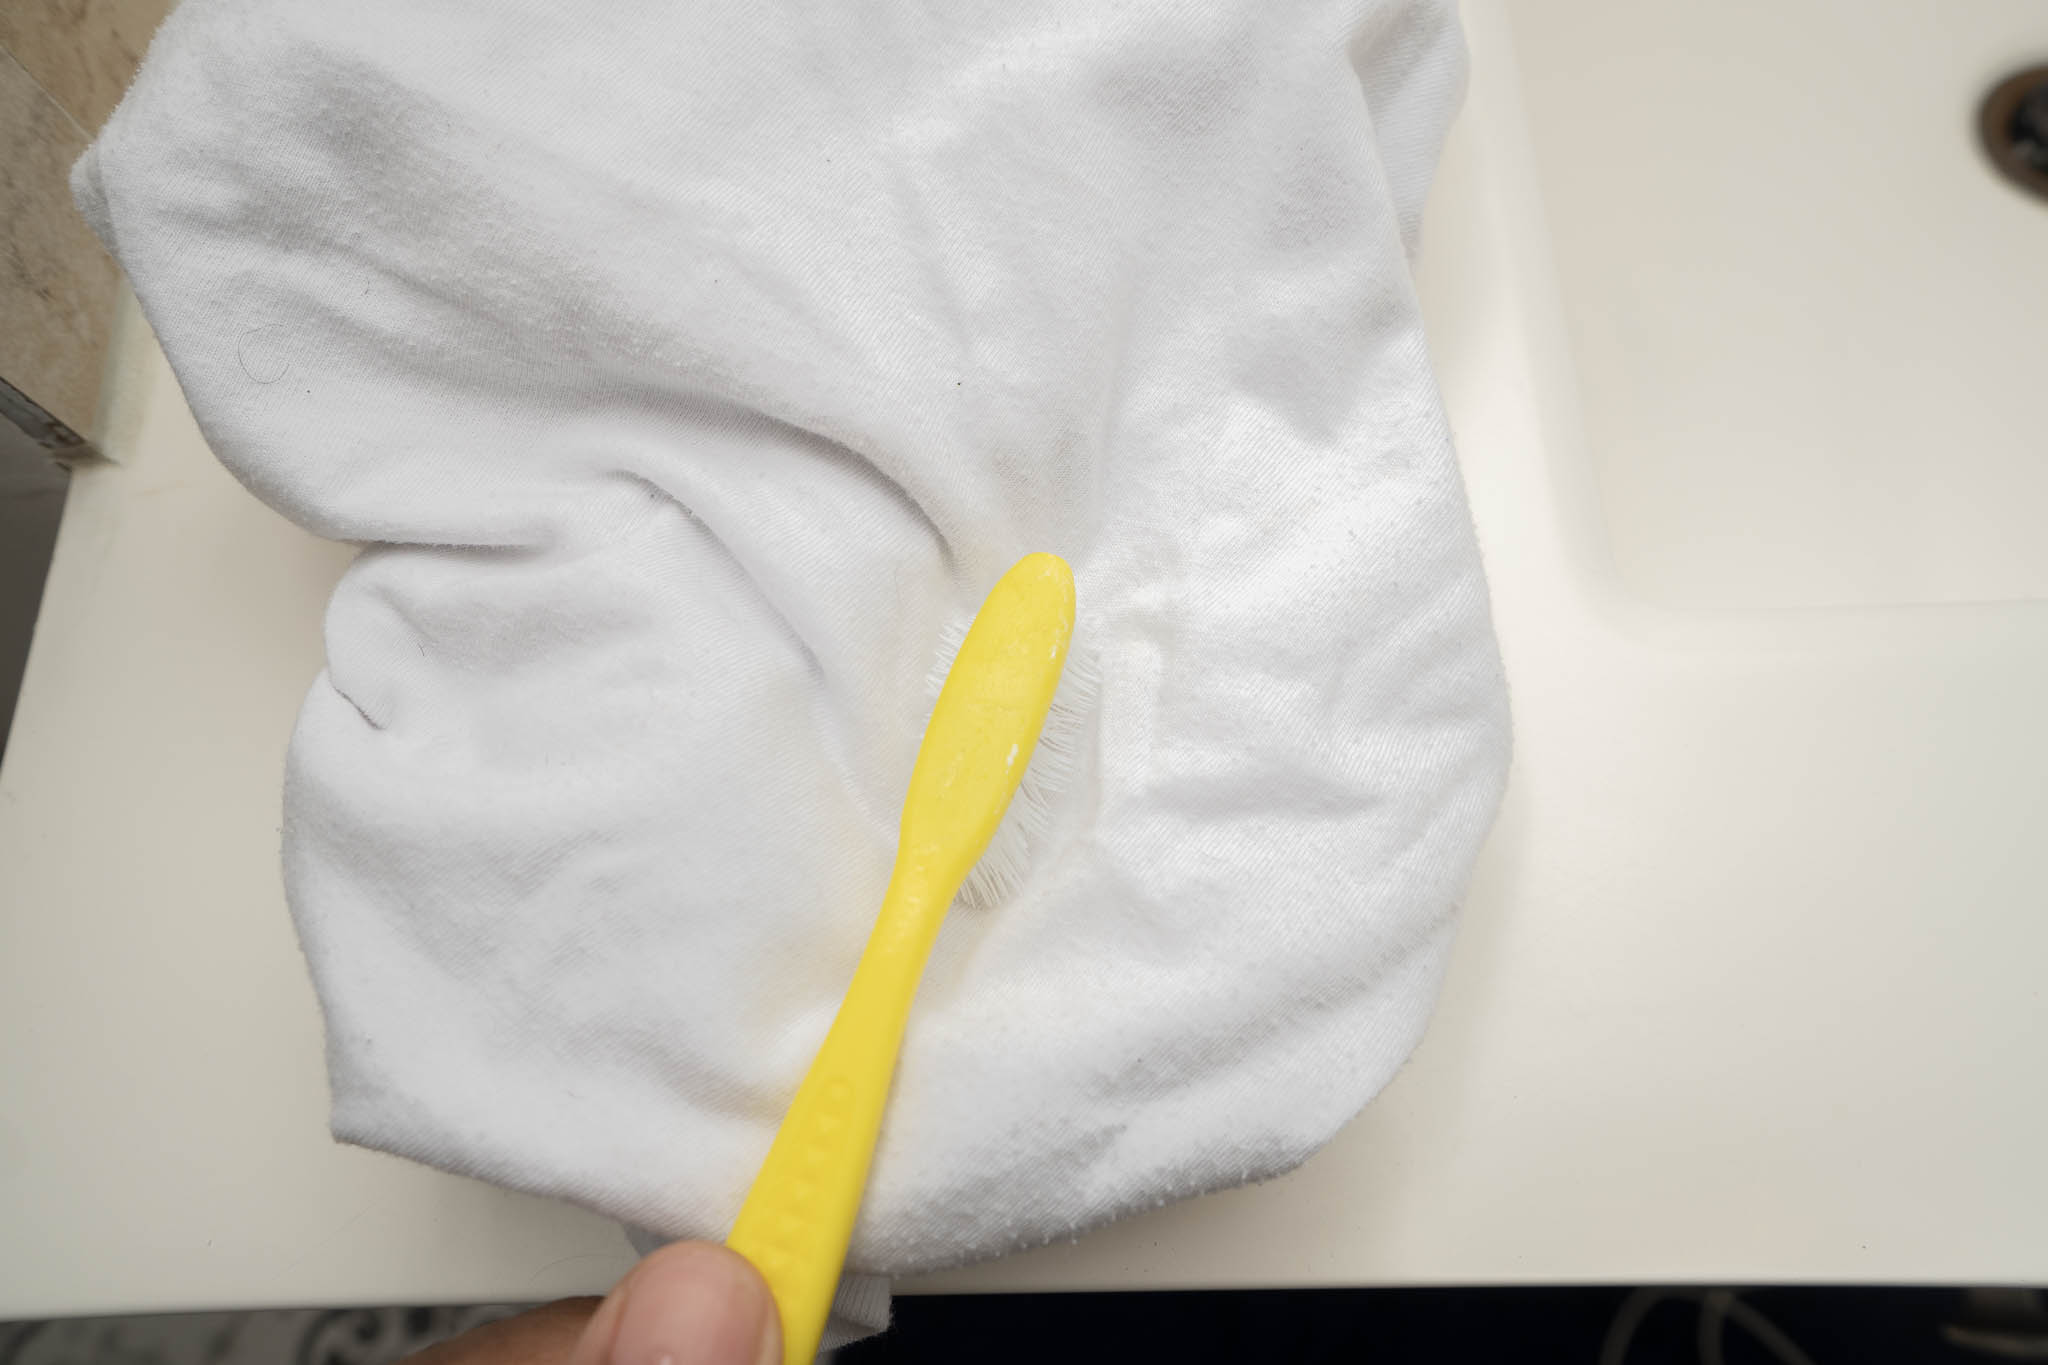 Using Toothbrush on clothes